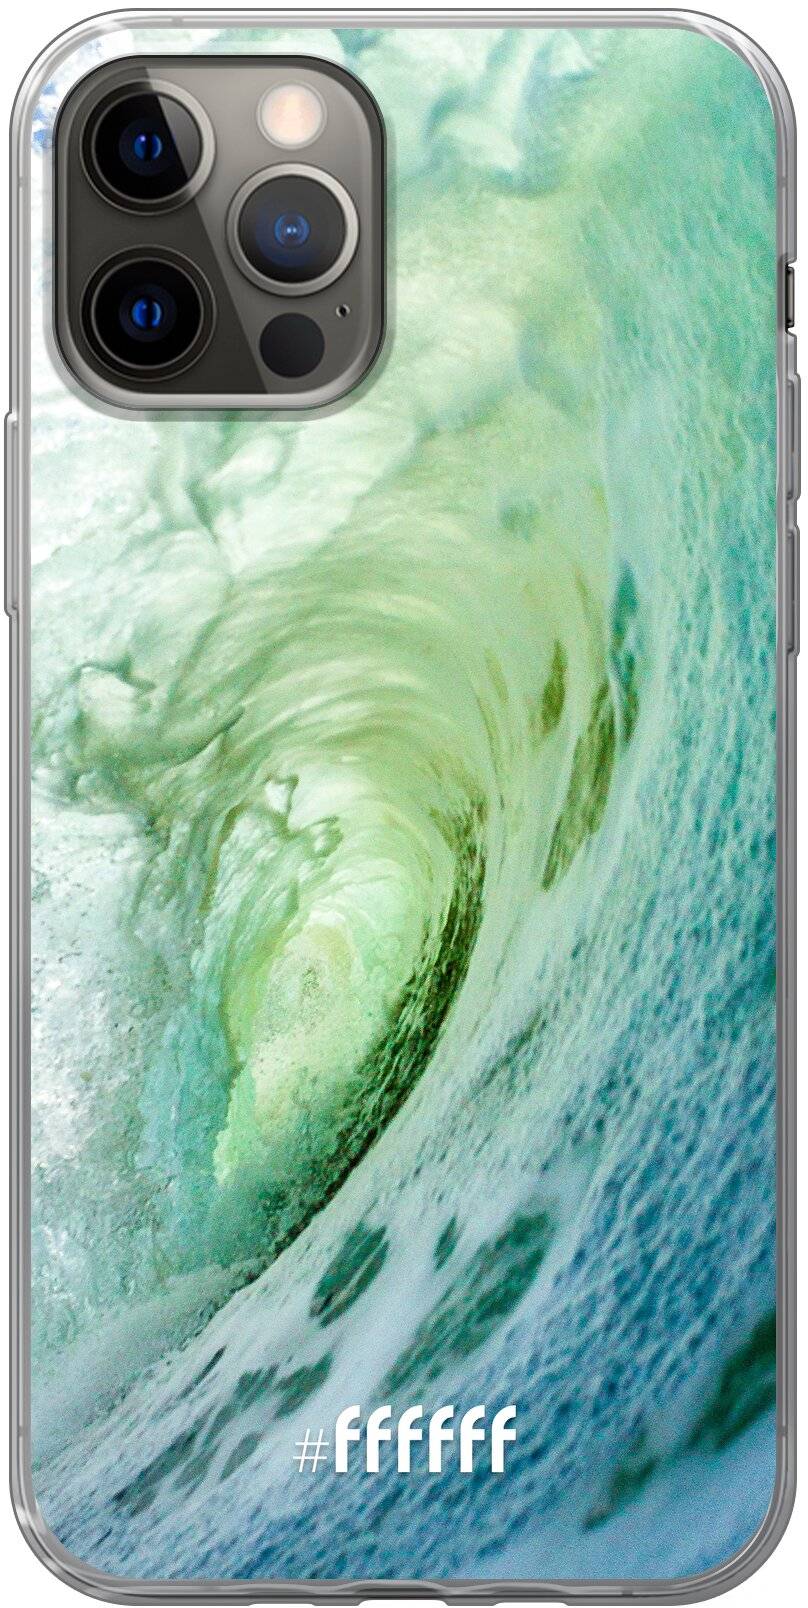 It's a Wave iPhone 12 Pro